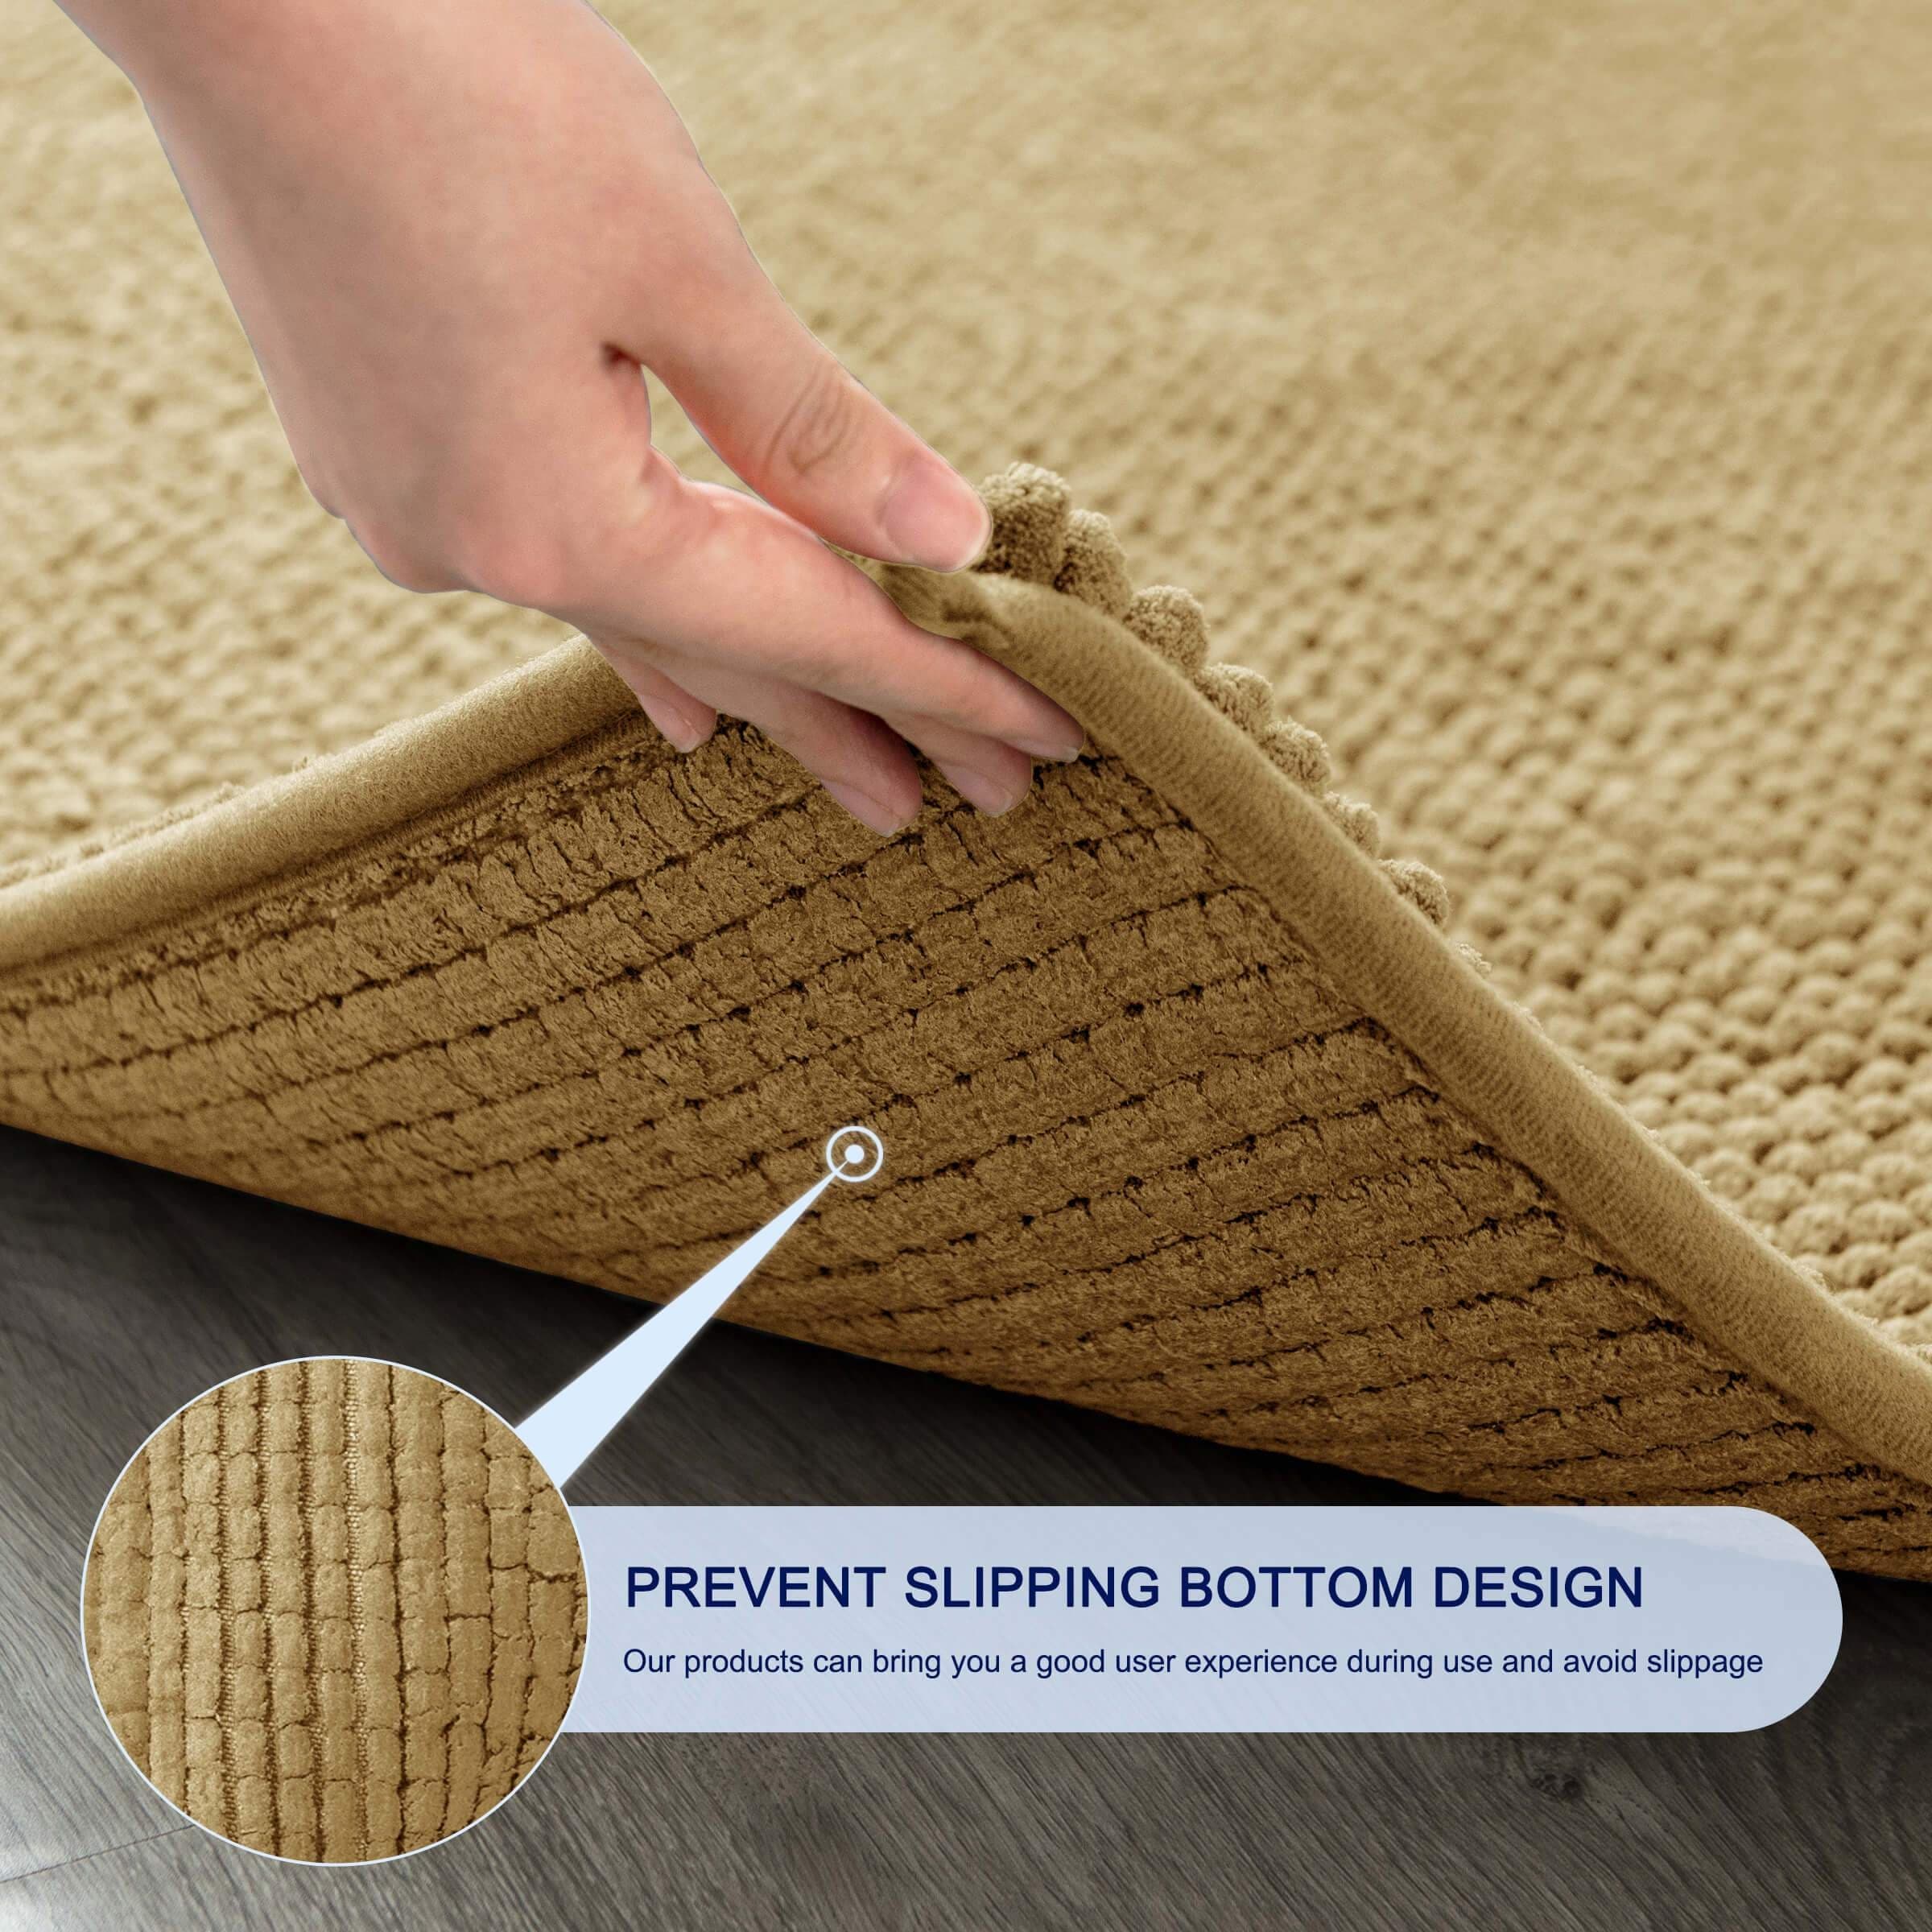 https://ak1.ostkcdn.com/images/products/is/images/direct/74b24b31813989ea941537439cde66824af750ac/Subrtex-Chenille-Bathroom-Rugs-Soft-Super-Water-Absorbing-Shower-Mats.jpg